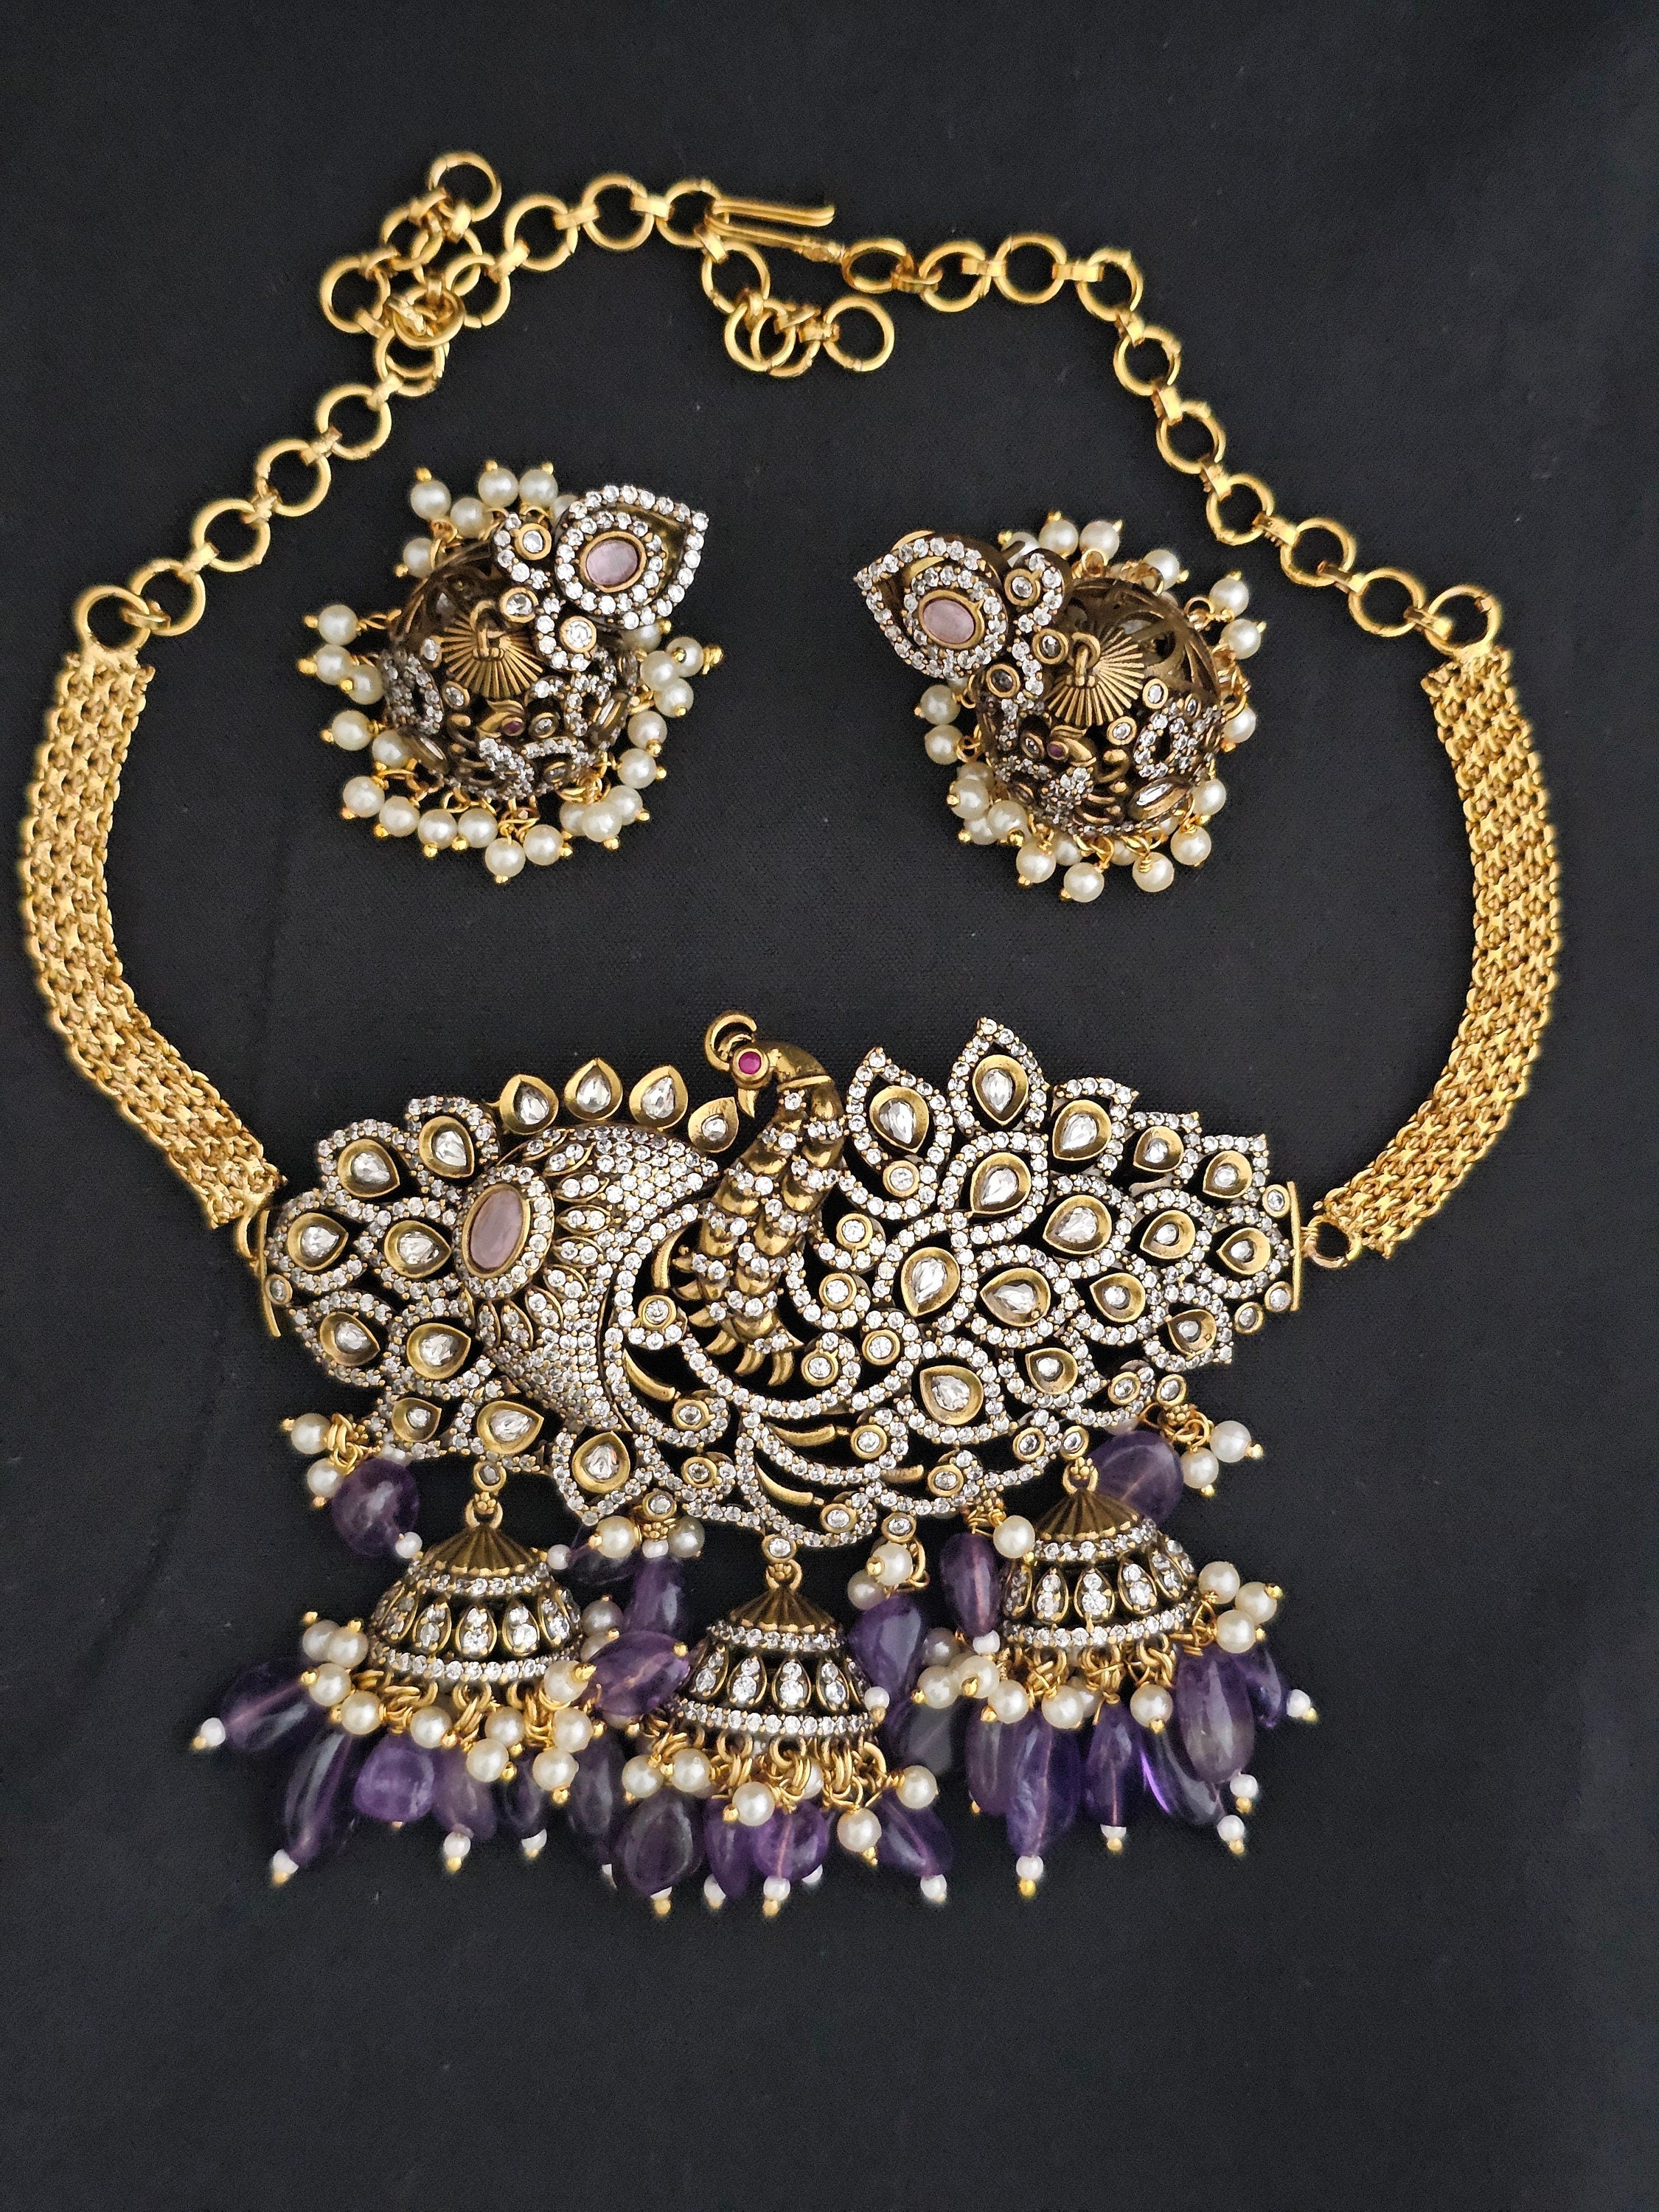 Peacock Premium Quality Gold polish Victorian Necklace with Beautiful Victorian matching Earrings